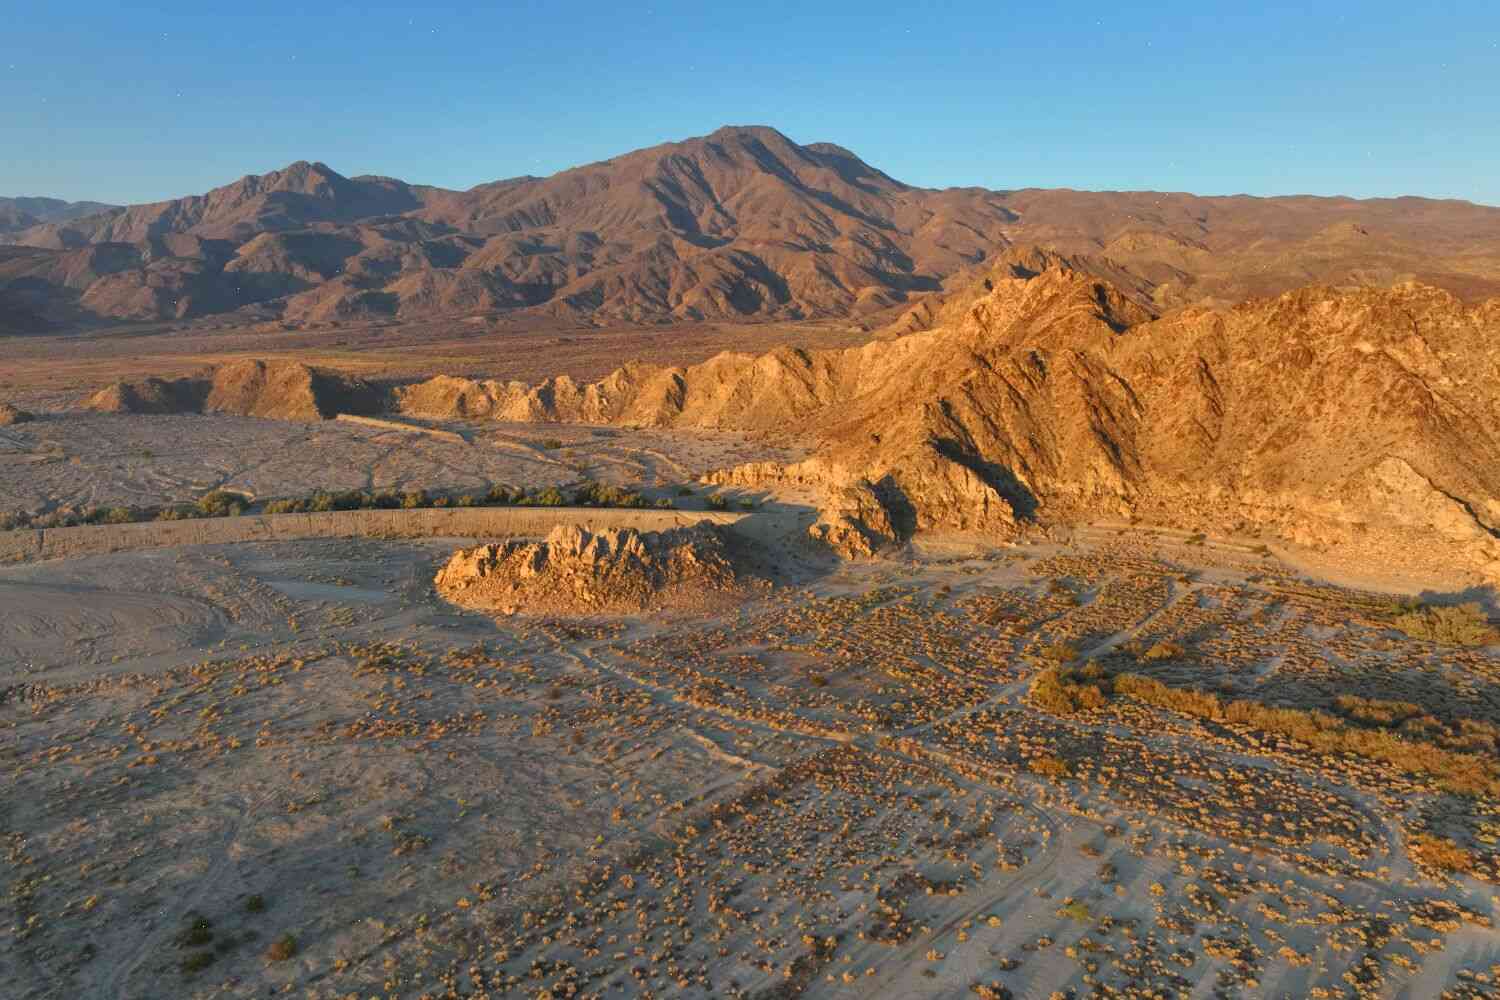 La Quinta proposes to build a high-end hotel on a vast expanse of dry land